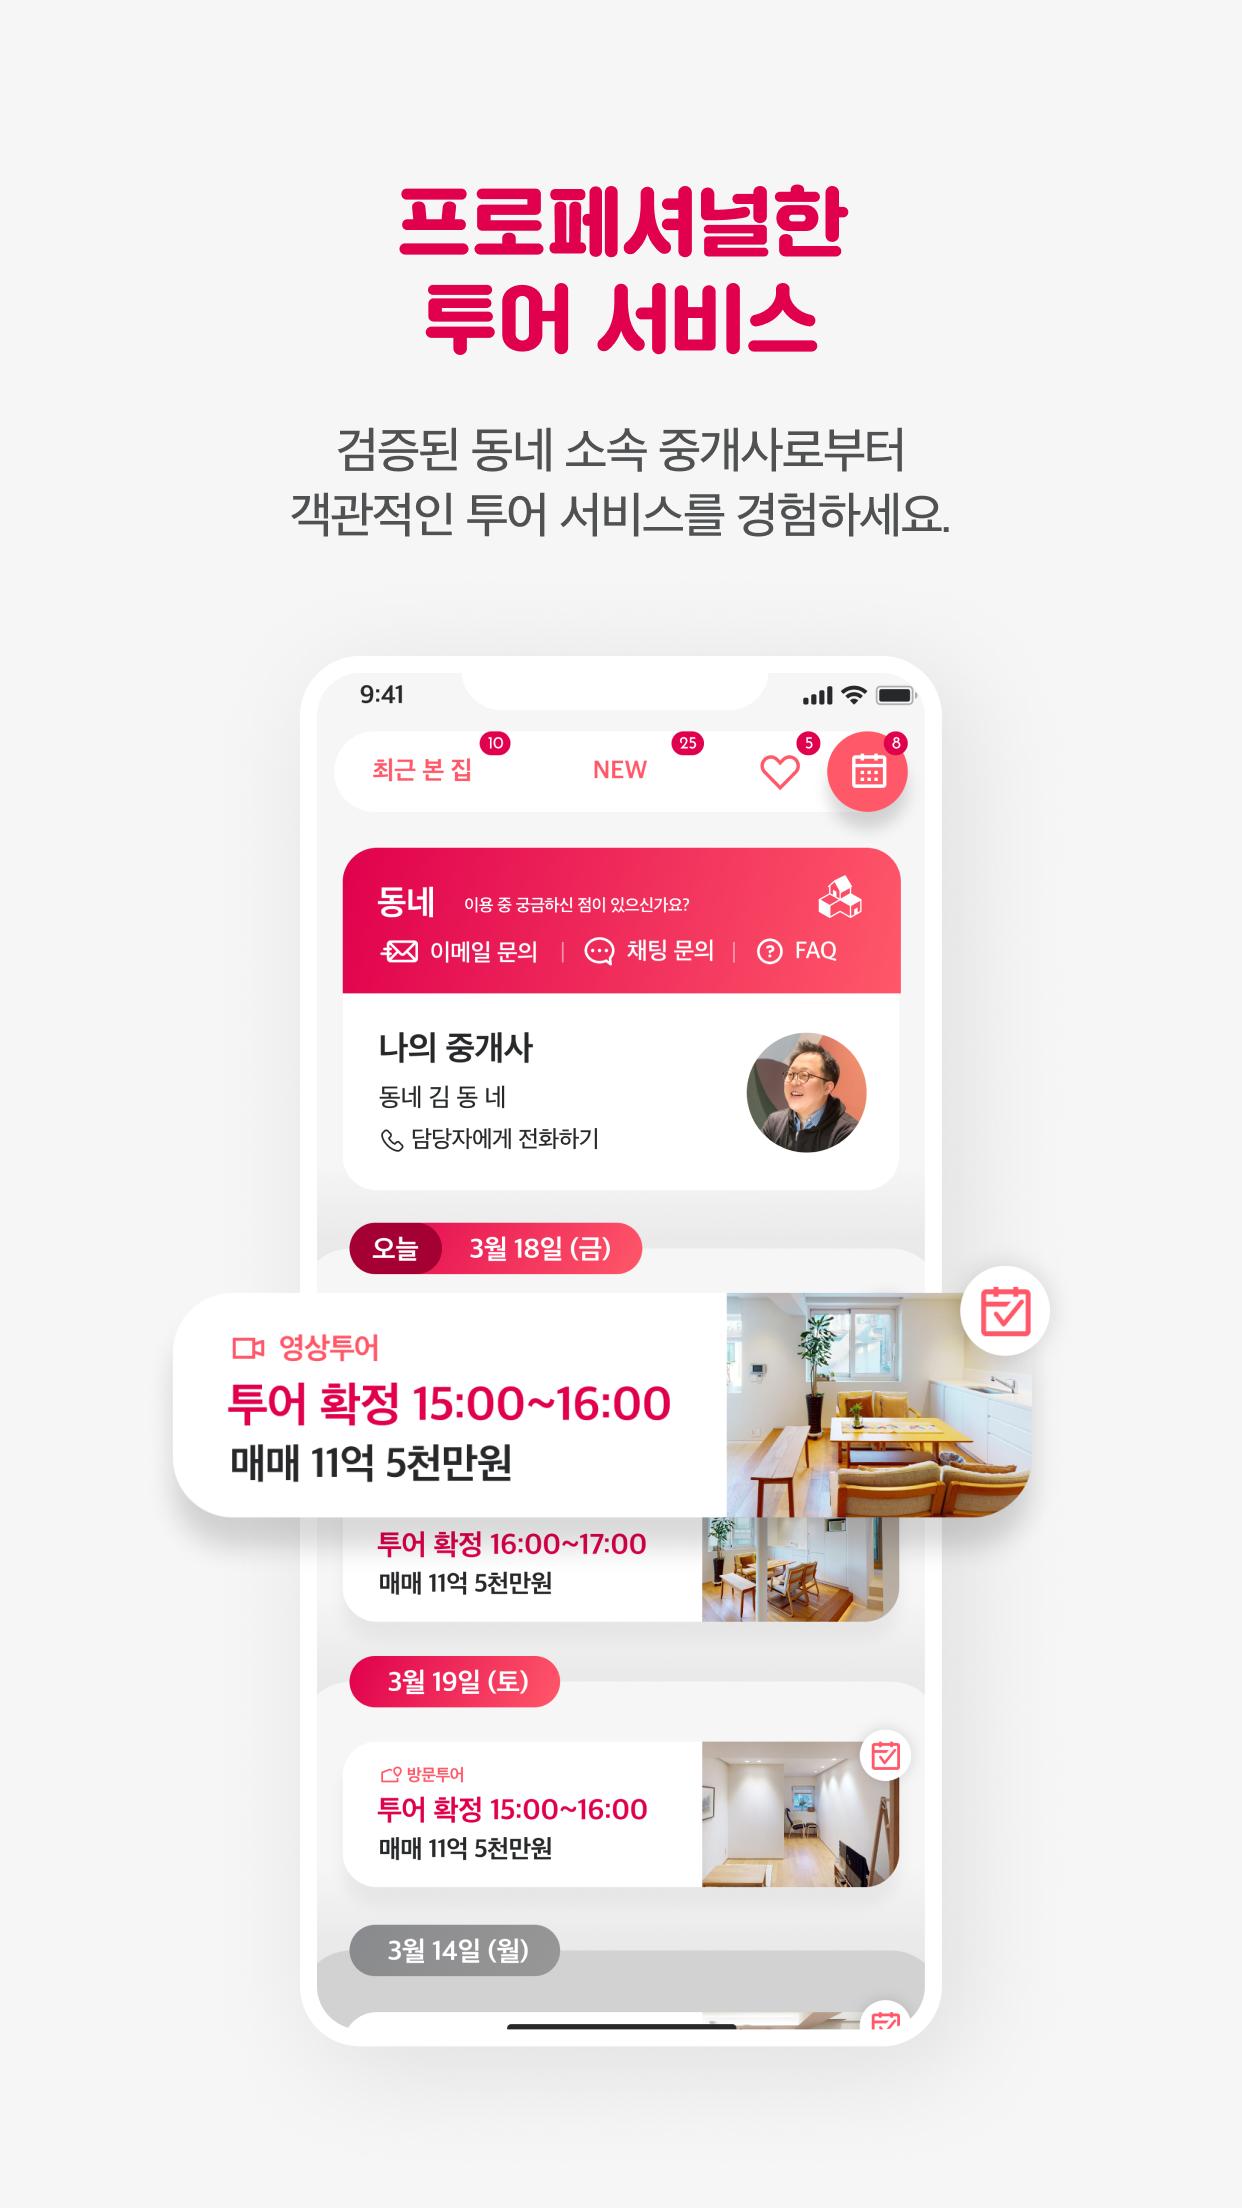 Dongnae Real Estate: Find Your Home 1.0.2 Screenshot 5